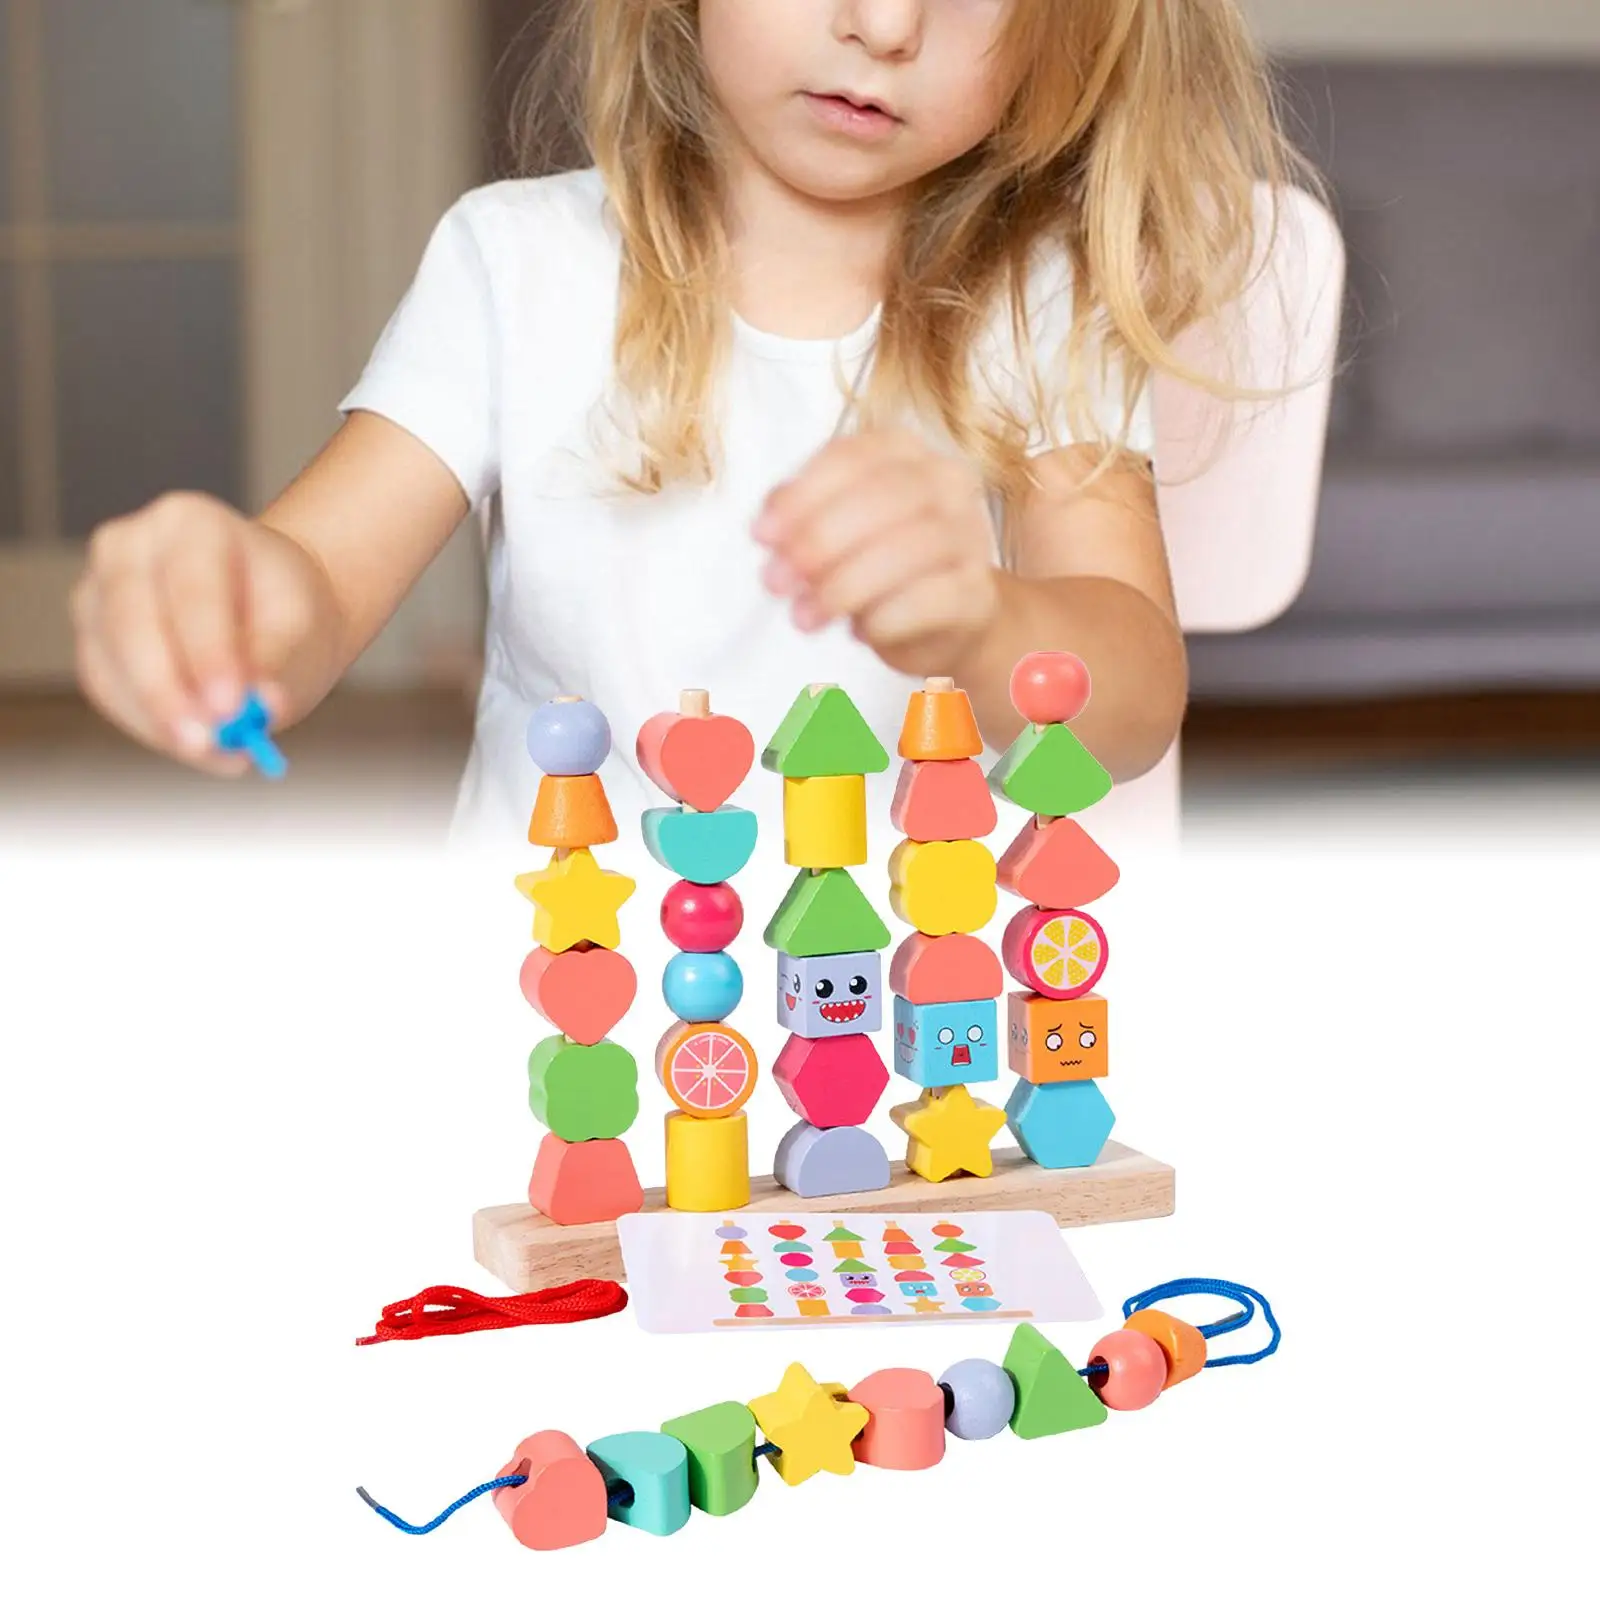 Montessori Threading Toys Matching Shapes Stacking Toy for Preschool